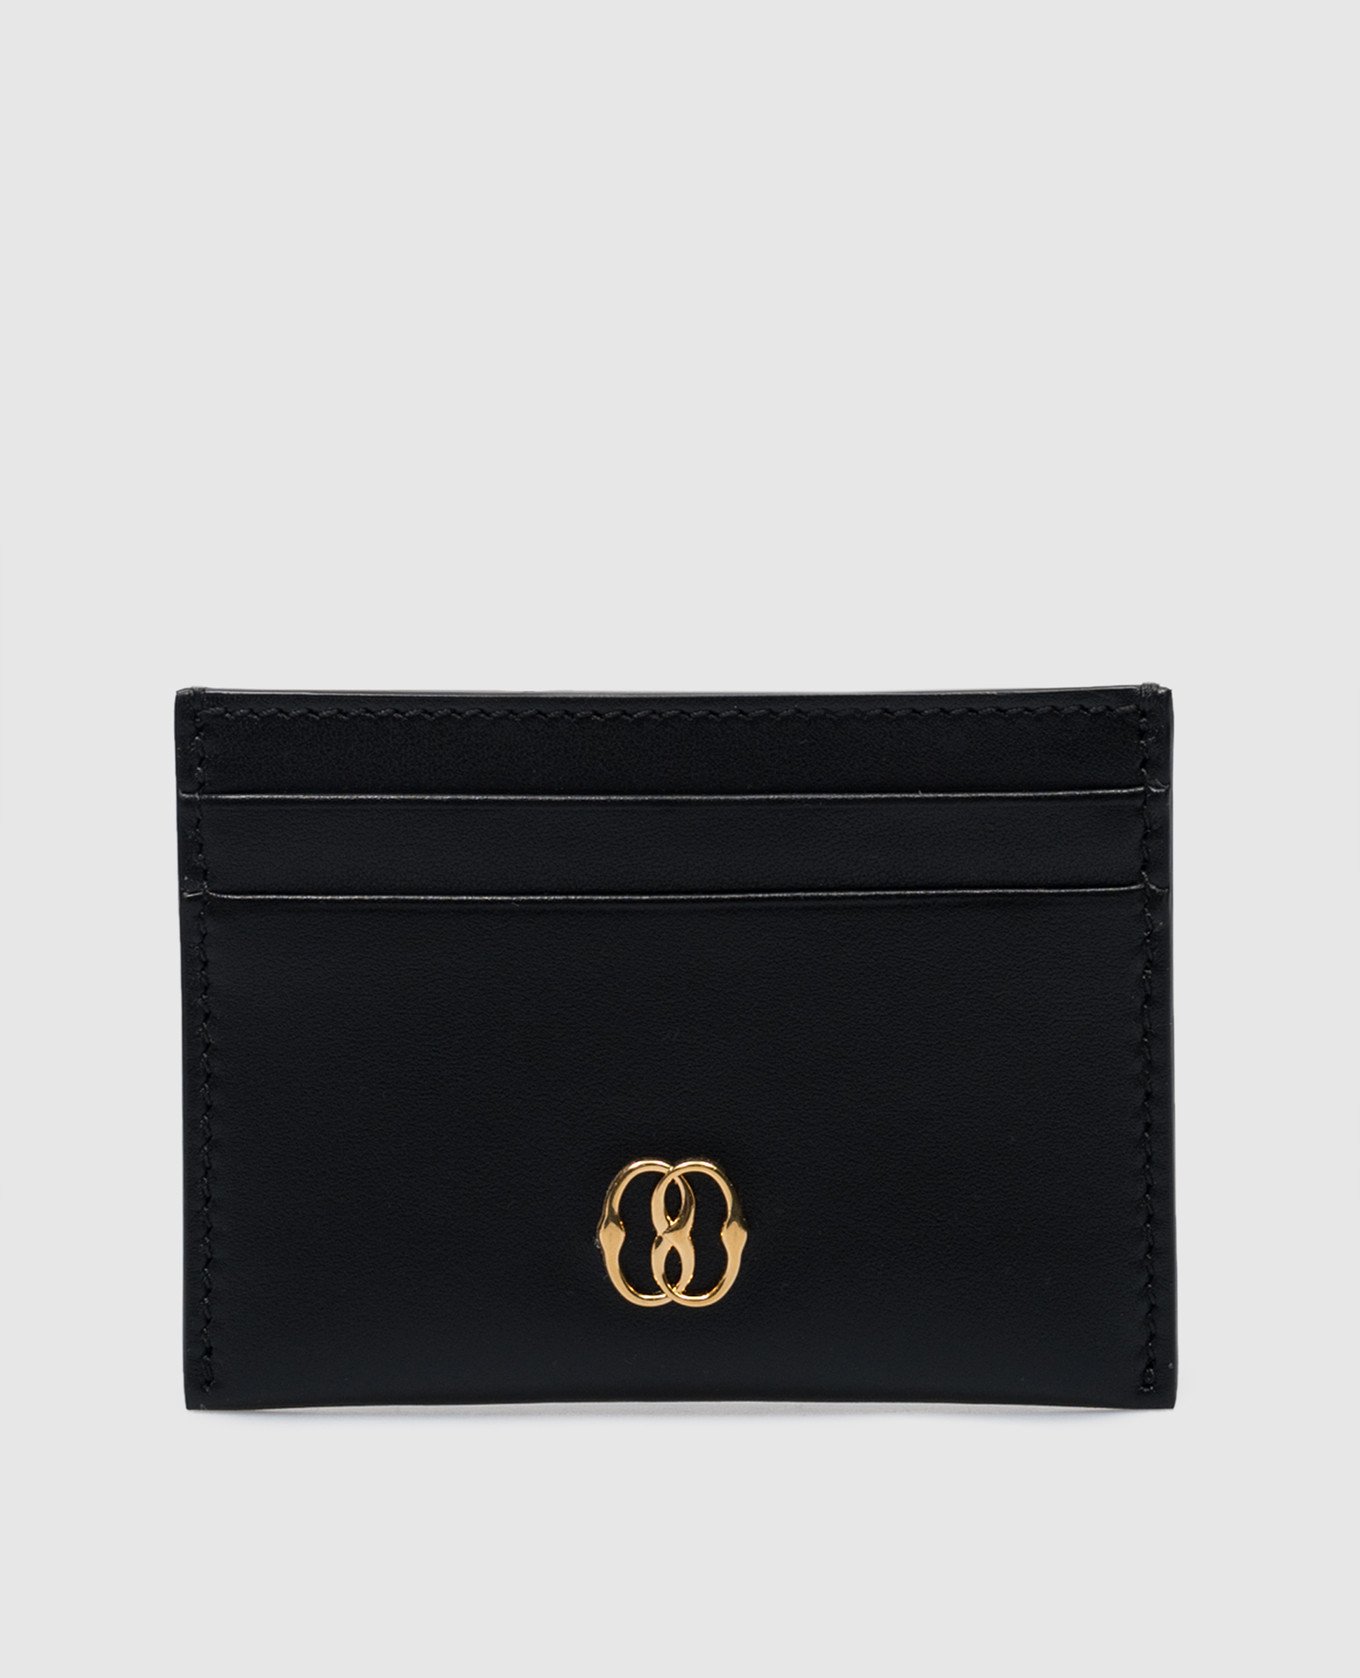 Black leather card holder with metal logo